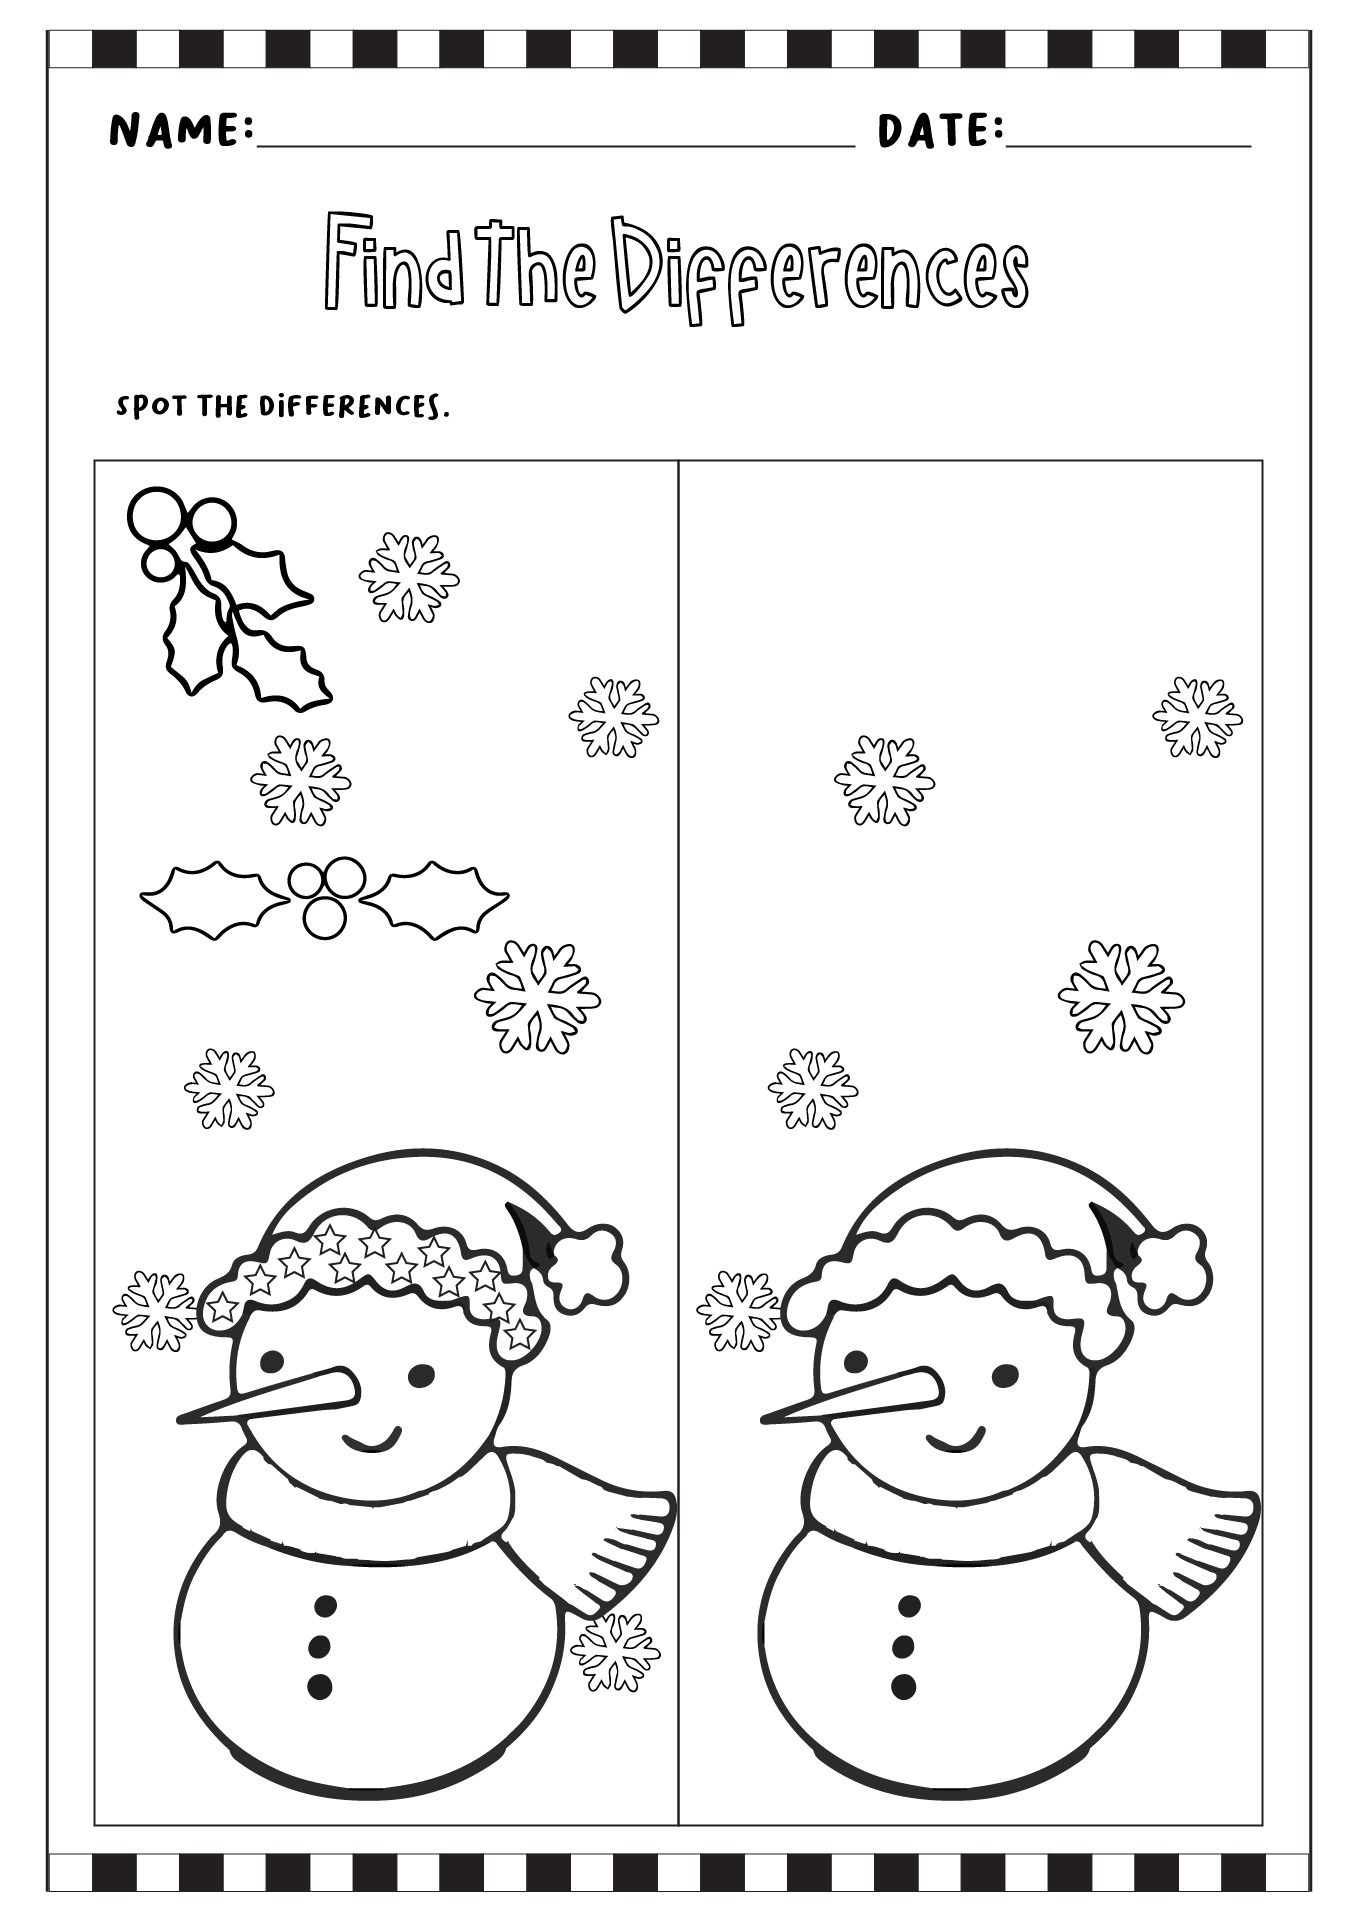 Find the Differences Worksheet